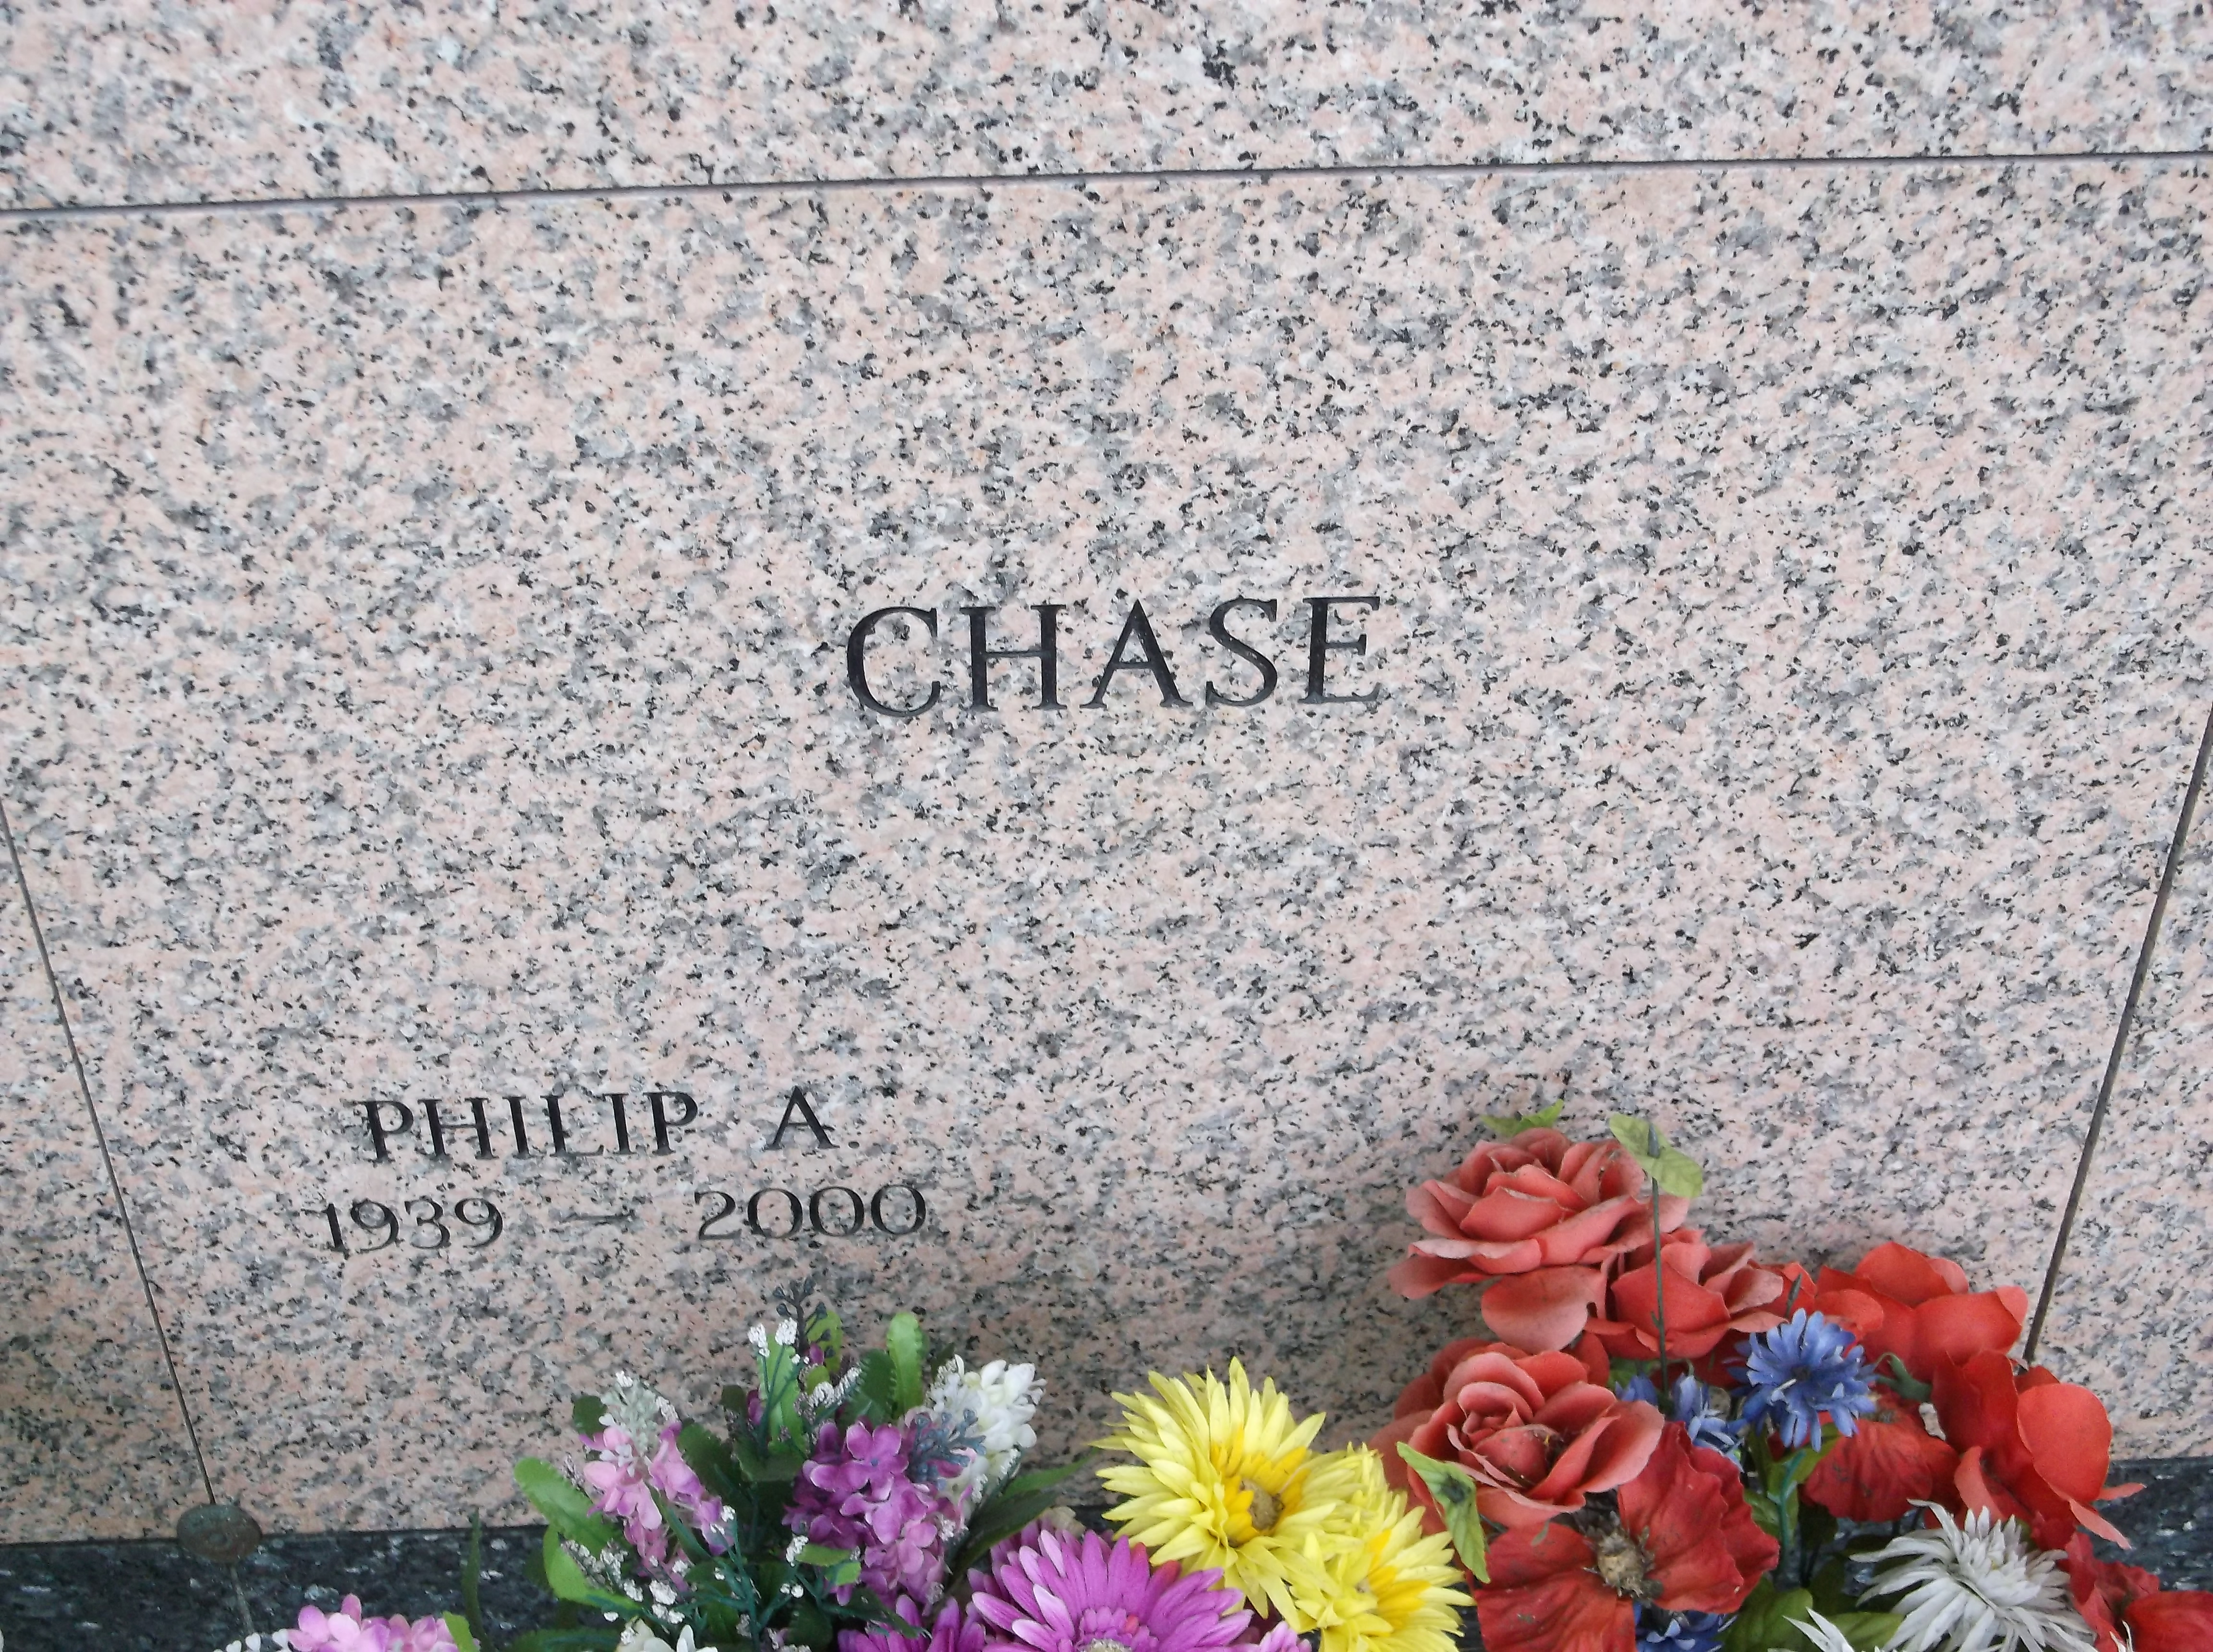 Philip A Chase